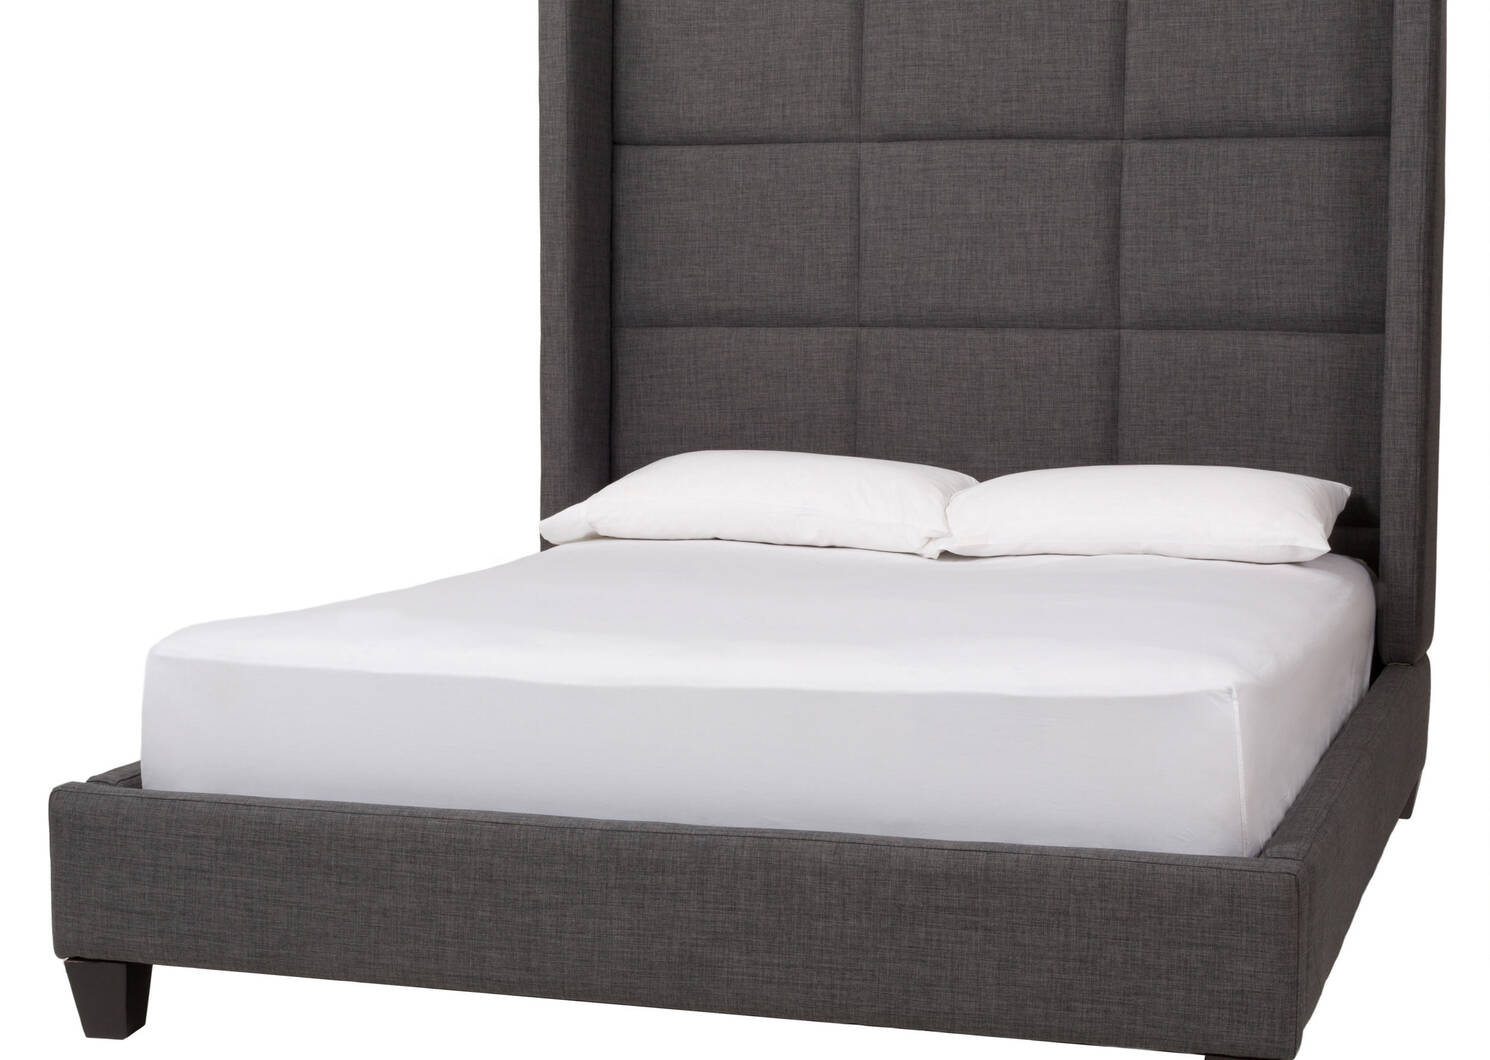 Greyson Bed -Tony Charcoal, QUEEN